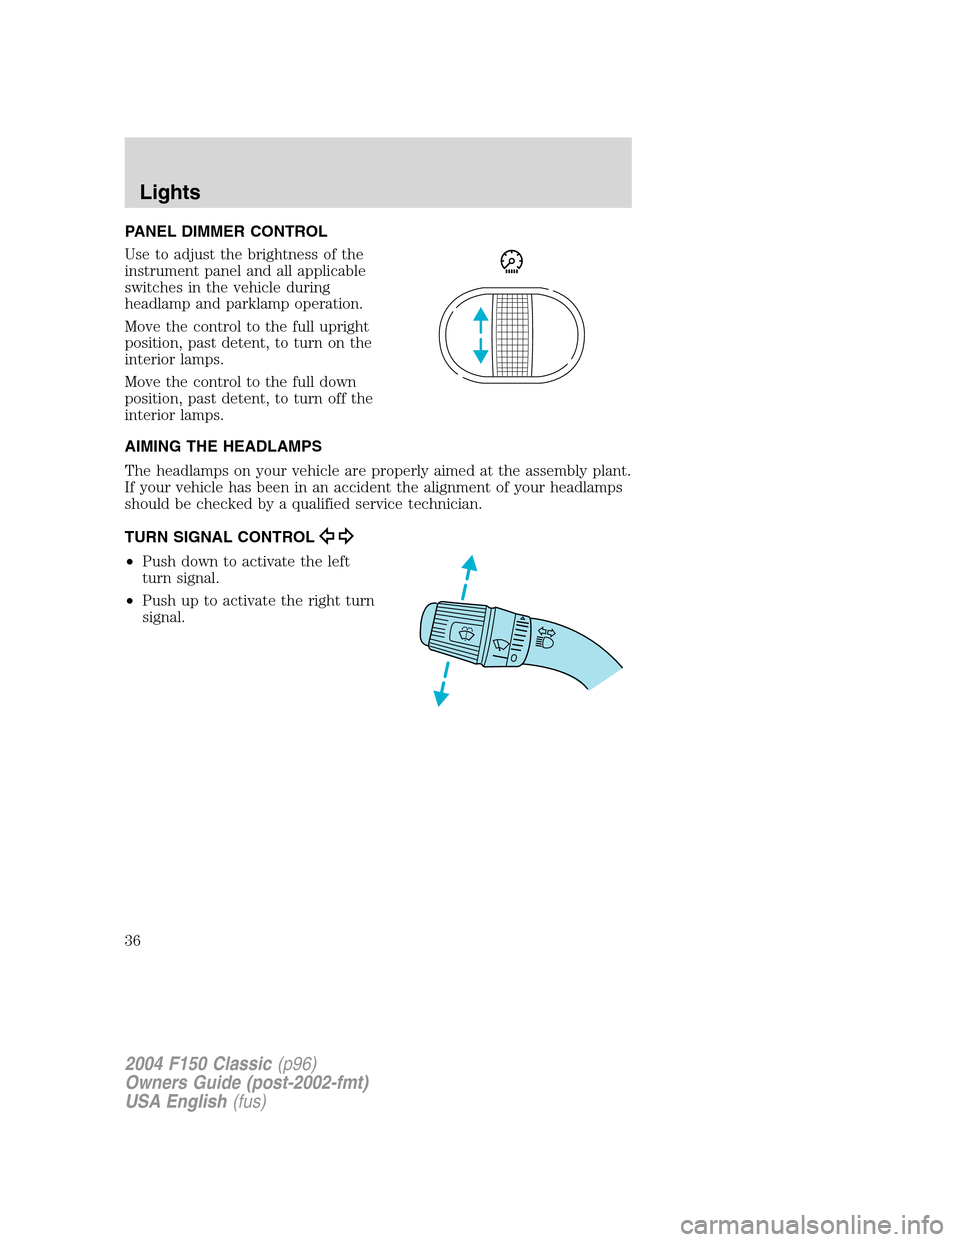 FORD F150 2004 11.G Herritage Owners Manual PANEL DIMMER CONTROL
Use to adjust the brightness of the
instrument panel and all applicable
switches in the vehicle during
headlamp and parklamp operation.
Move the control to the full upright
positi